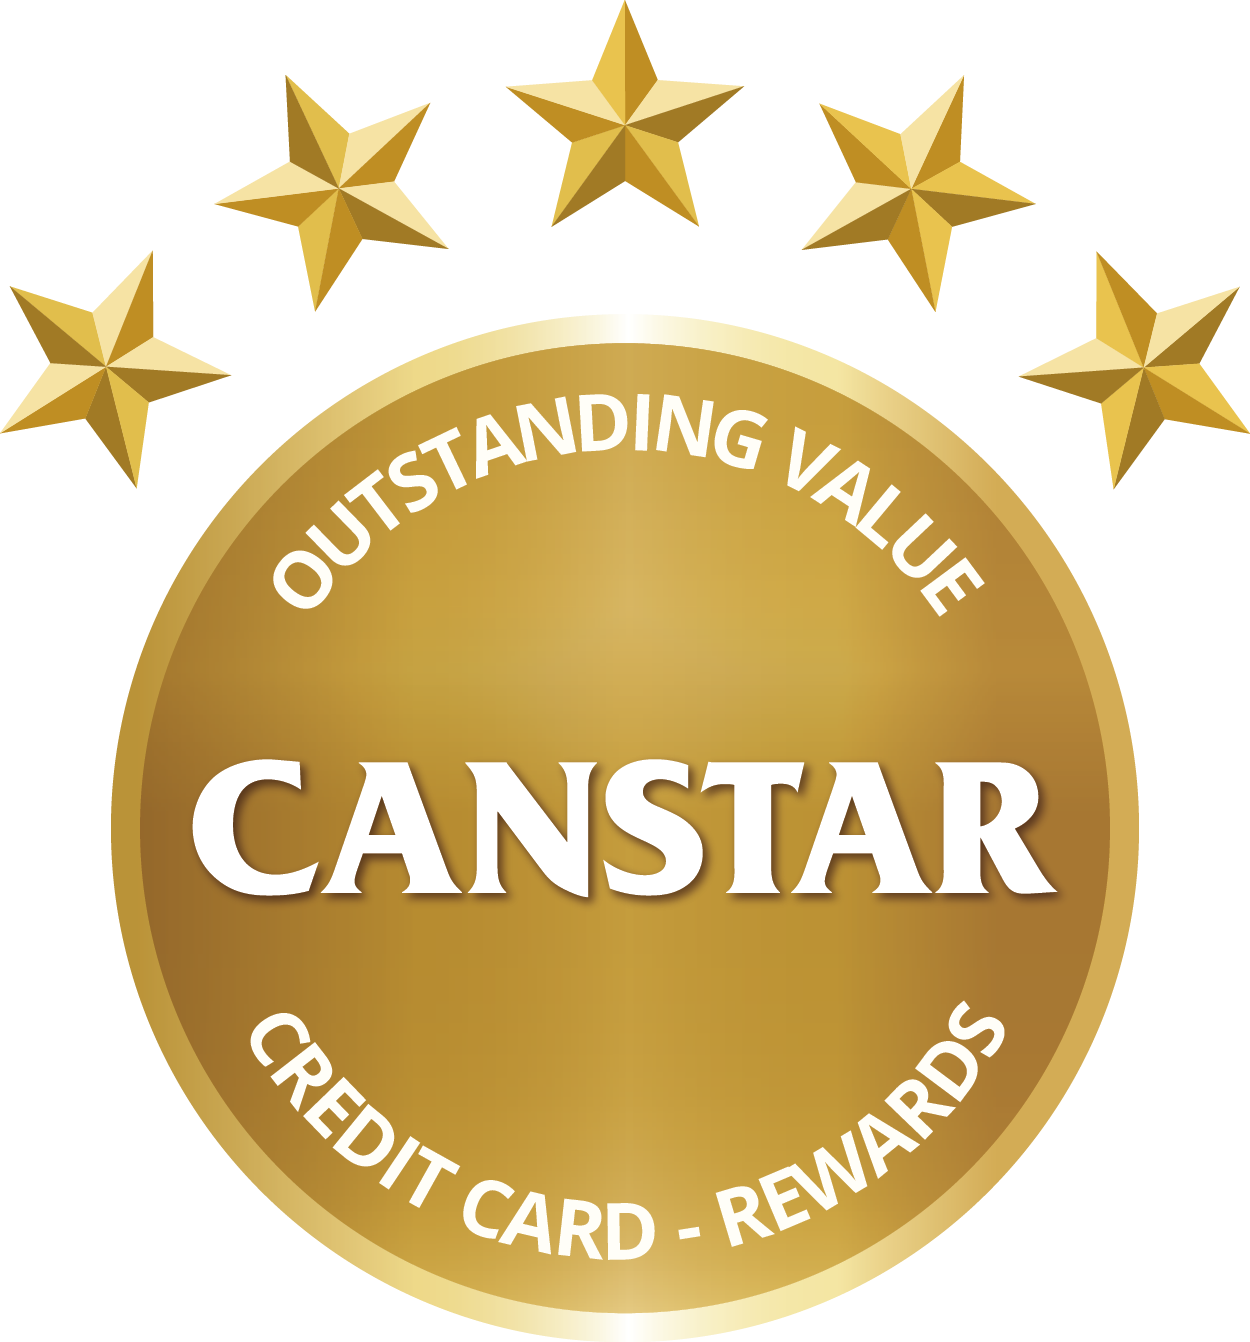 CANSTAR – Outstanding Value – Credit Card – Rewards